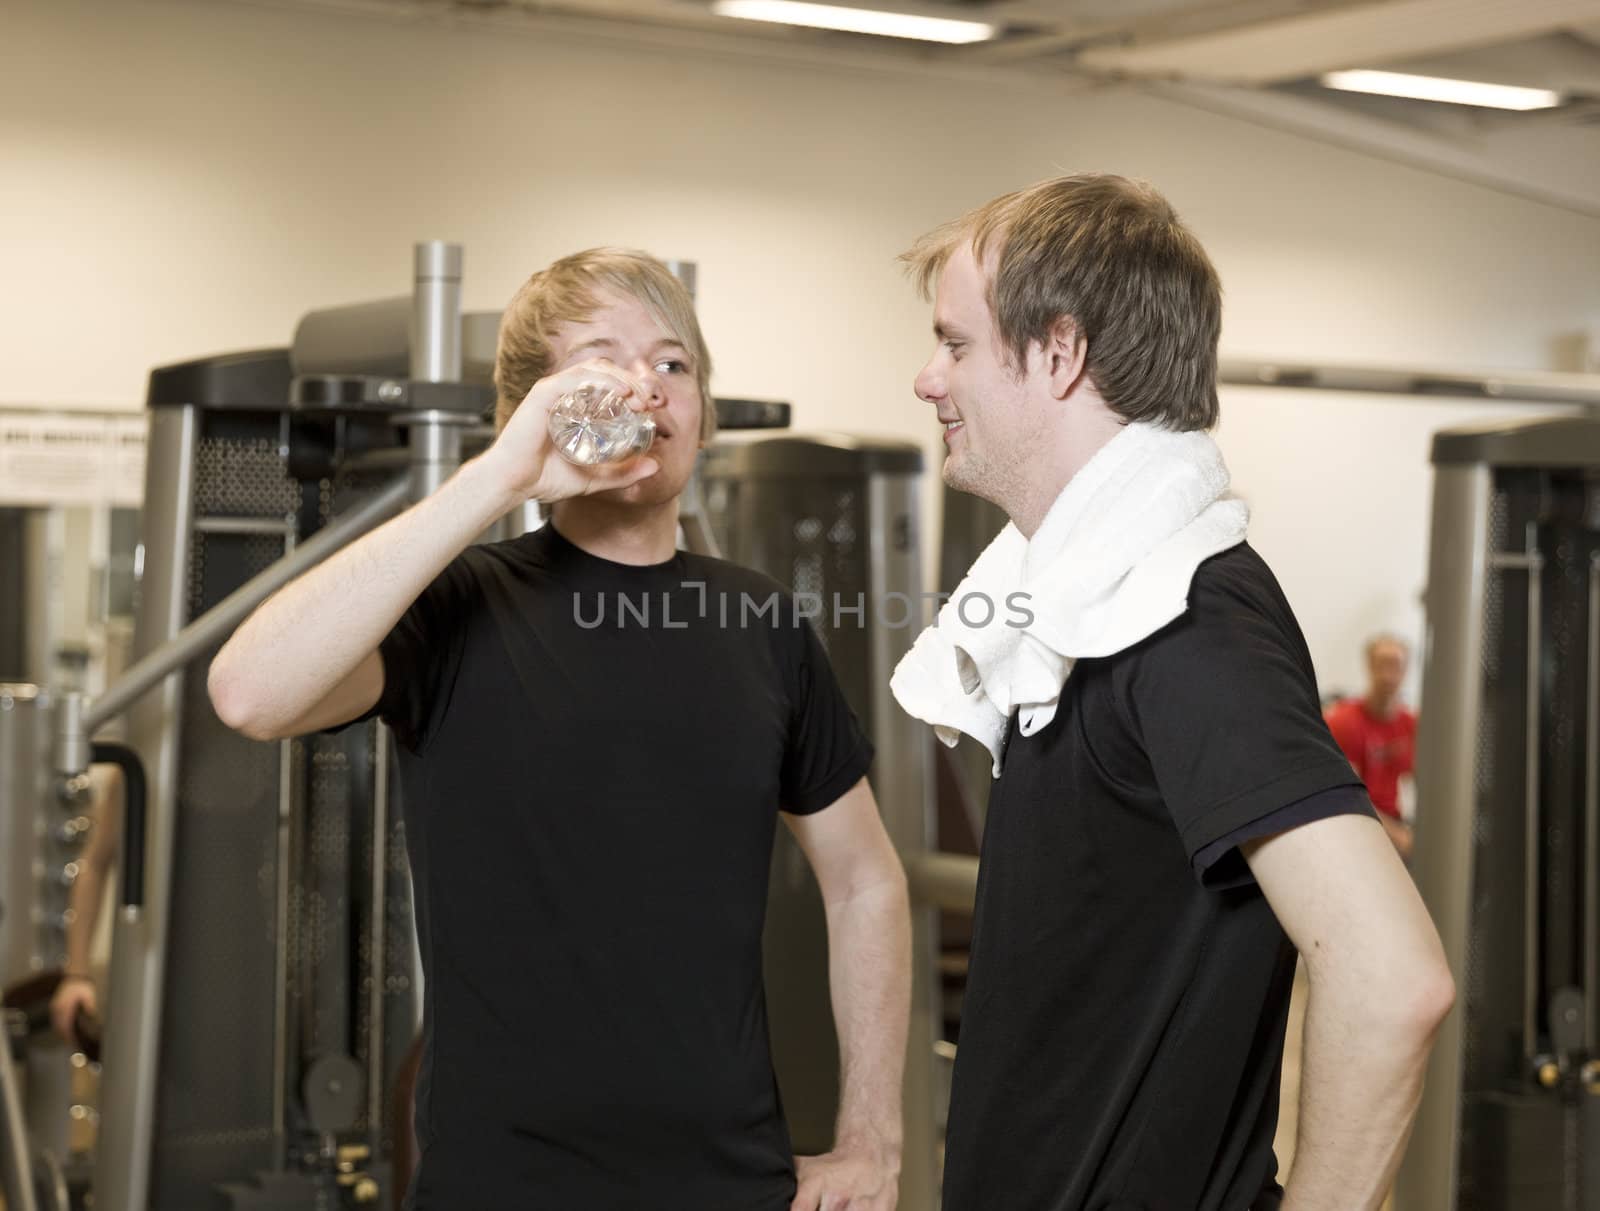 Two young men talking at a healthc club